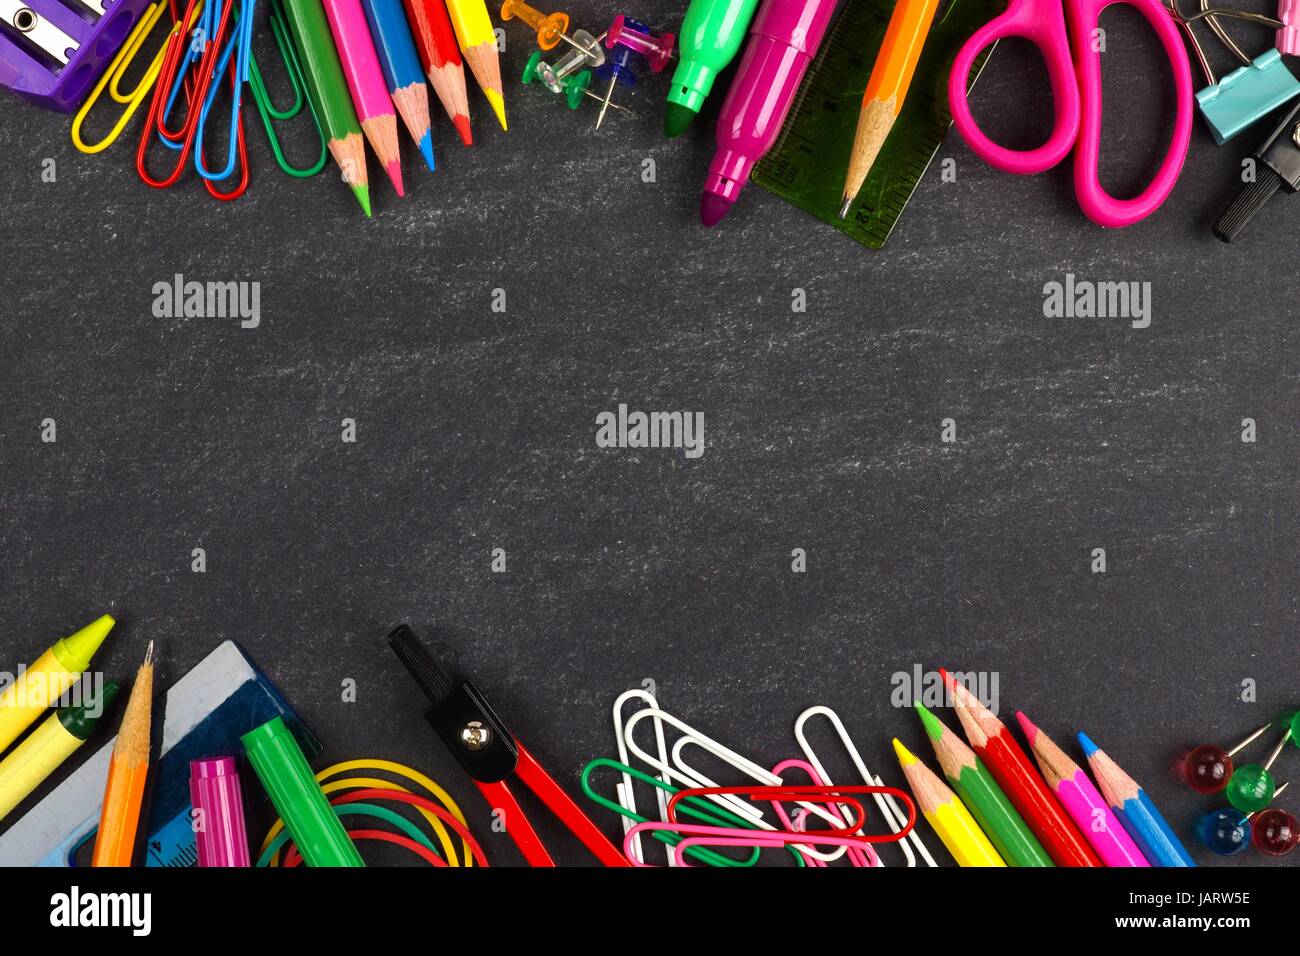 School supplies double border on a chalkboard background Stock Photo